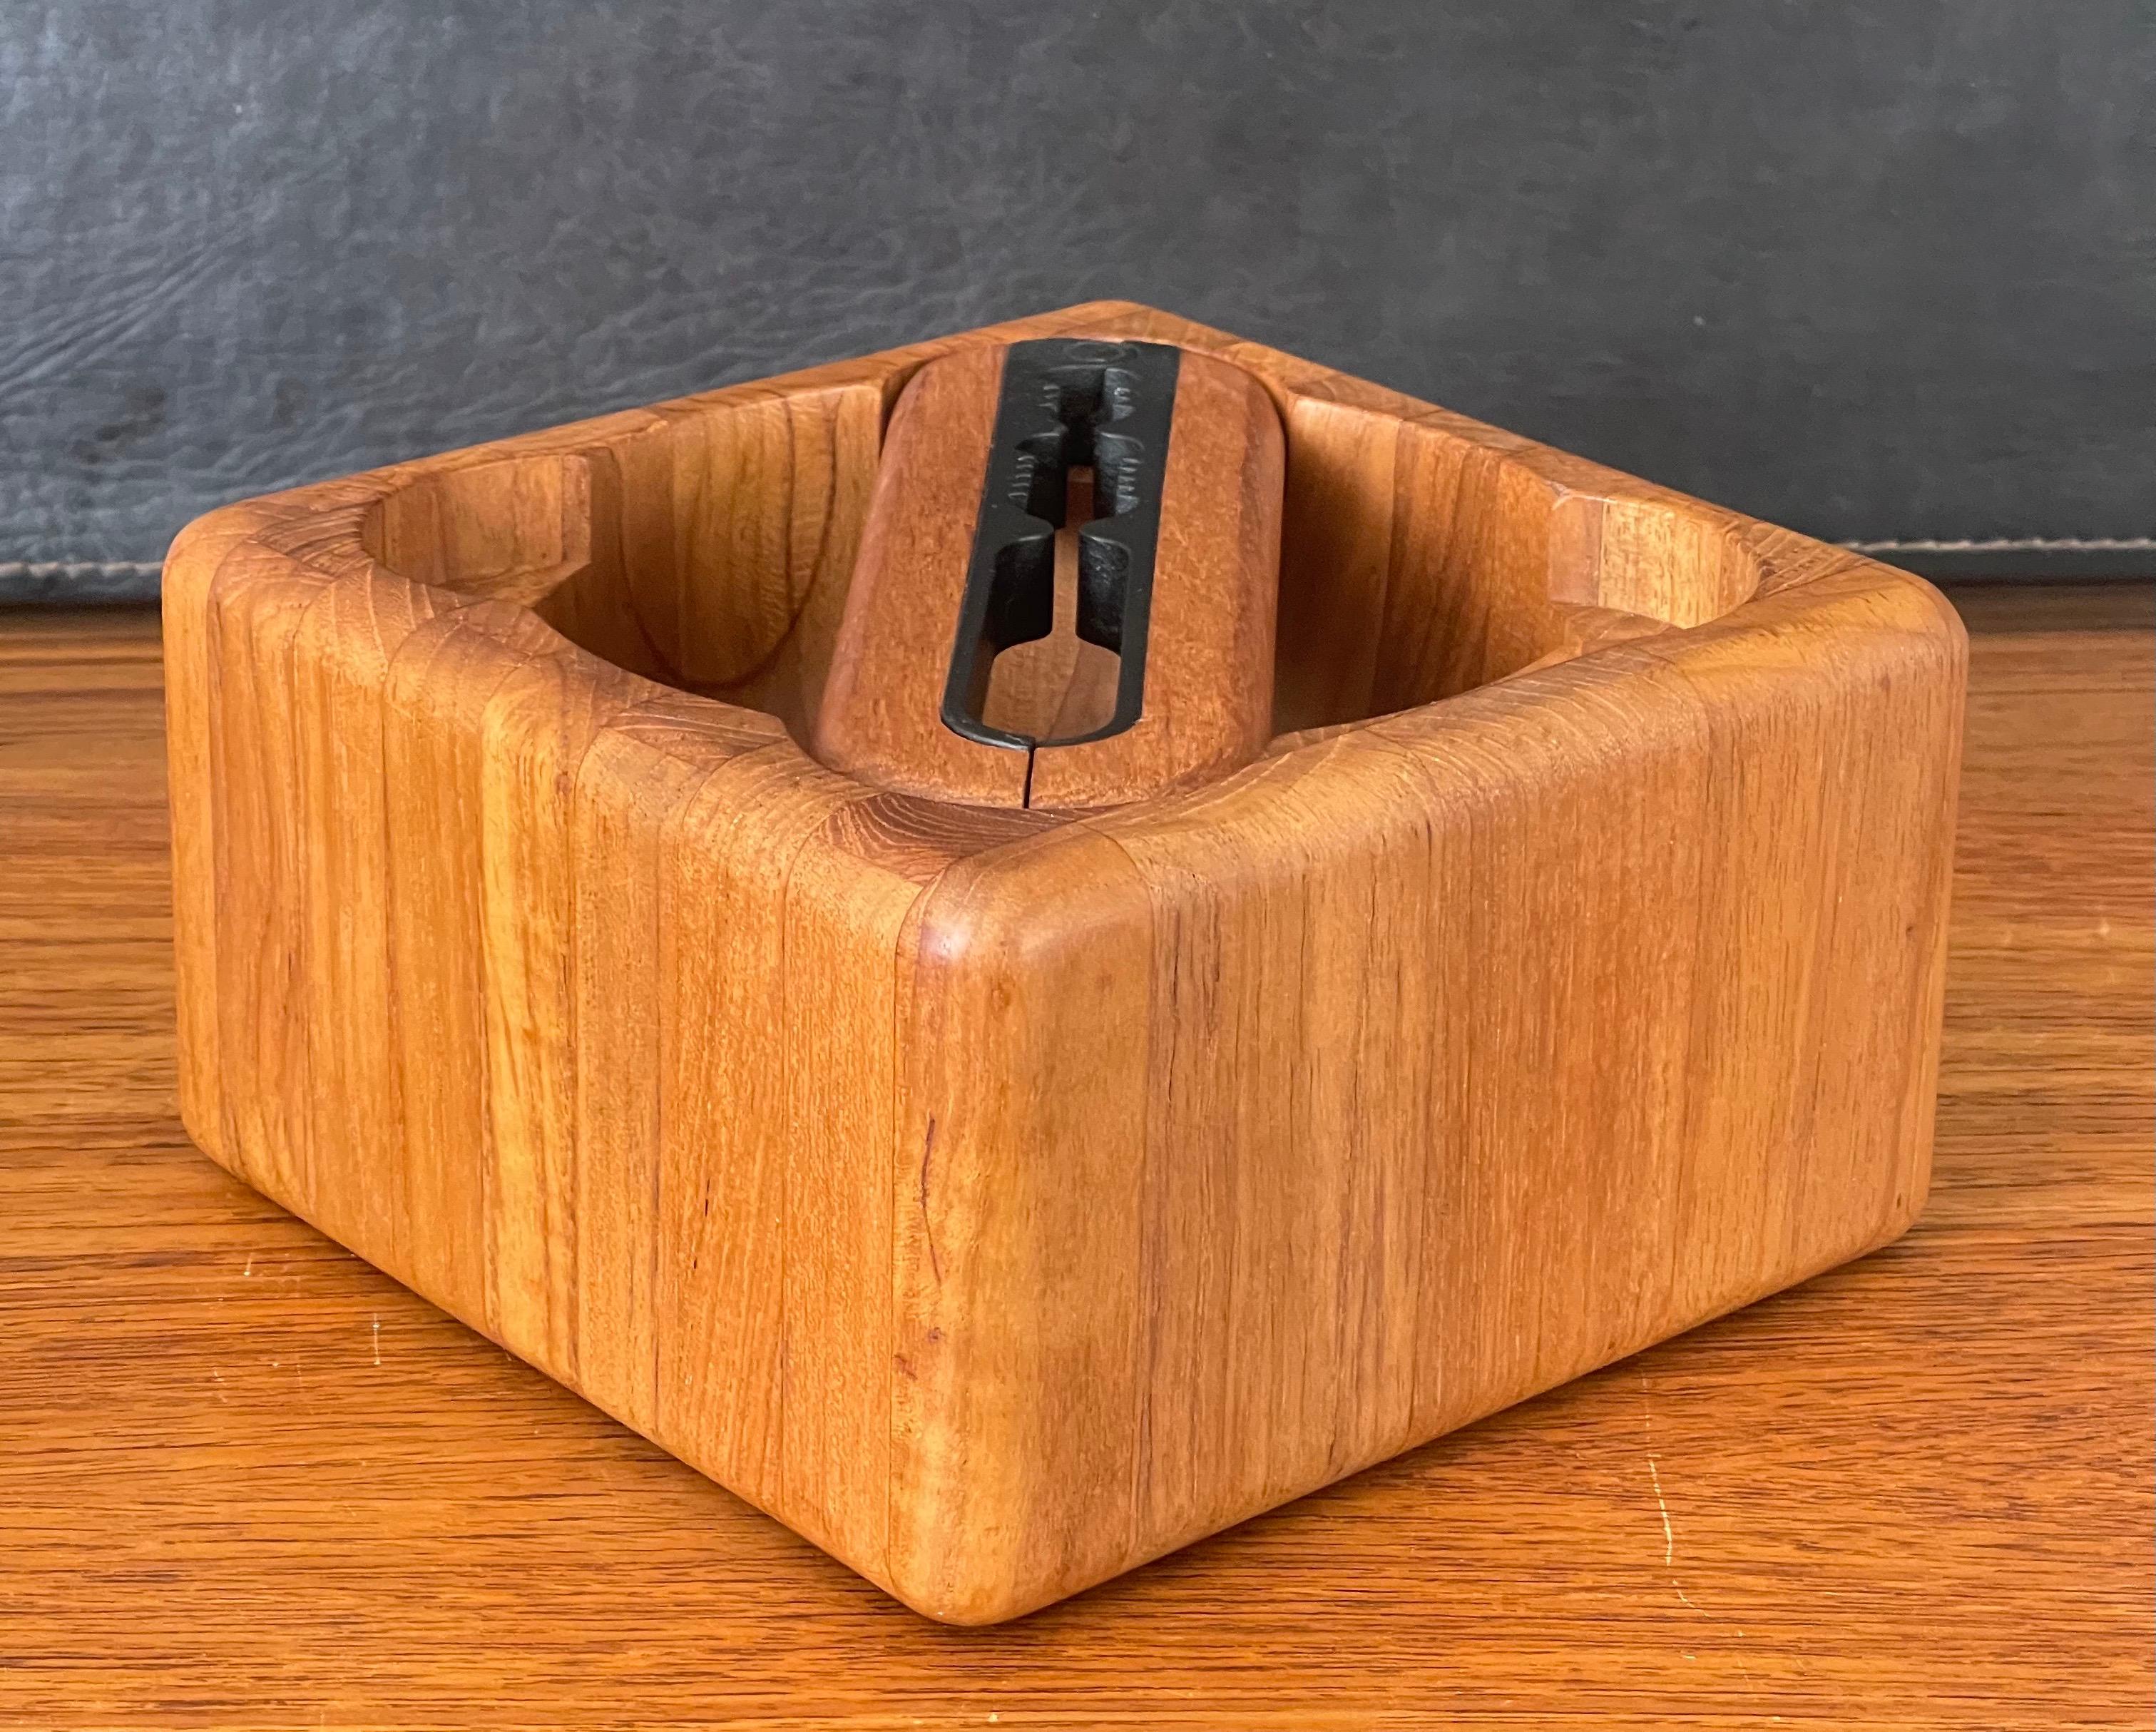 A very rare Danish modern staved teak nutcracker & bowl by Flemming Digsmed for Nissen, circa 1960s. The set is simple and elegant with great design and measures 7